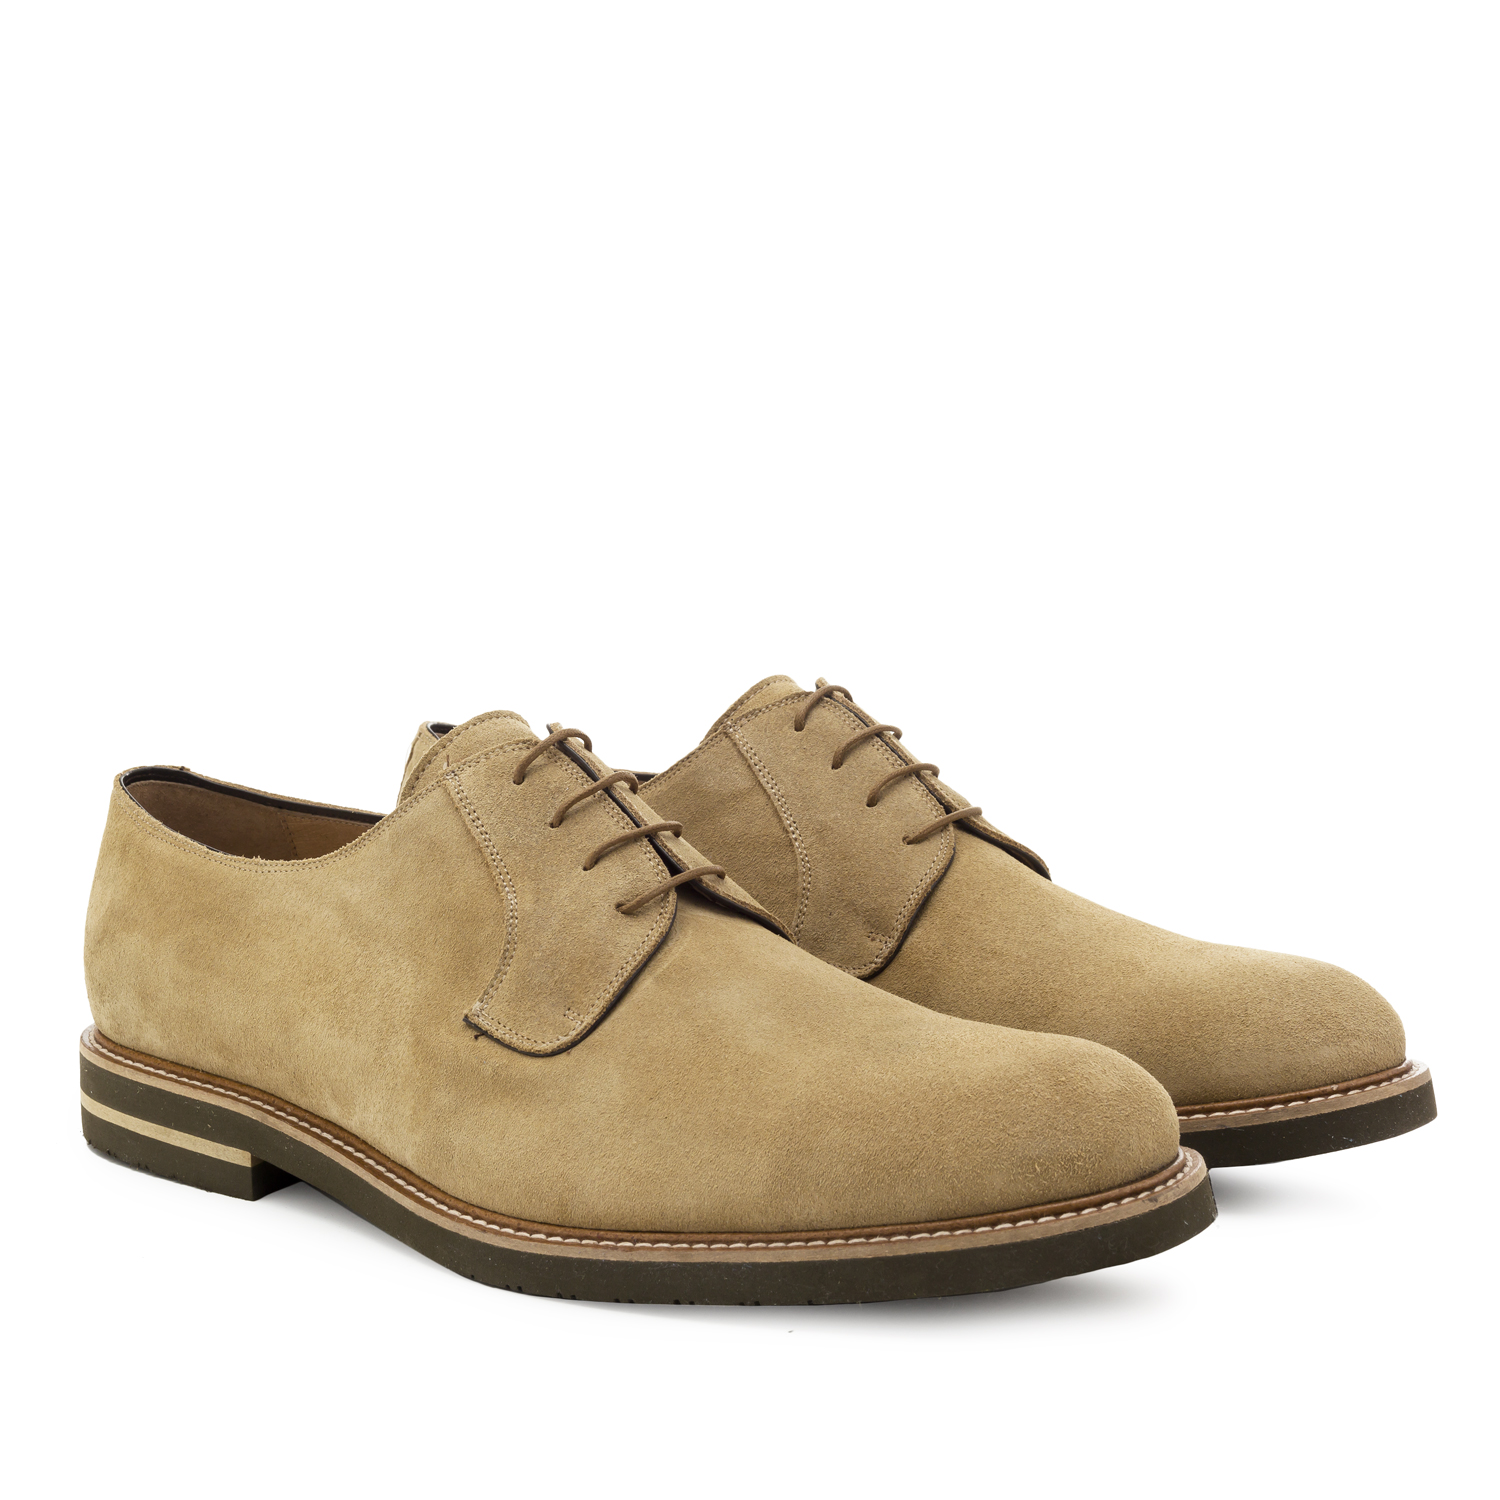 Oxford Shoes in Sand-coloured Split Leather 